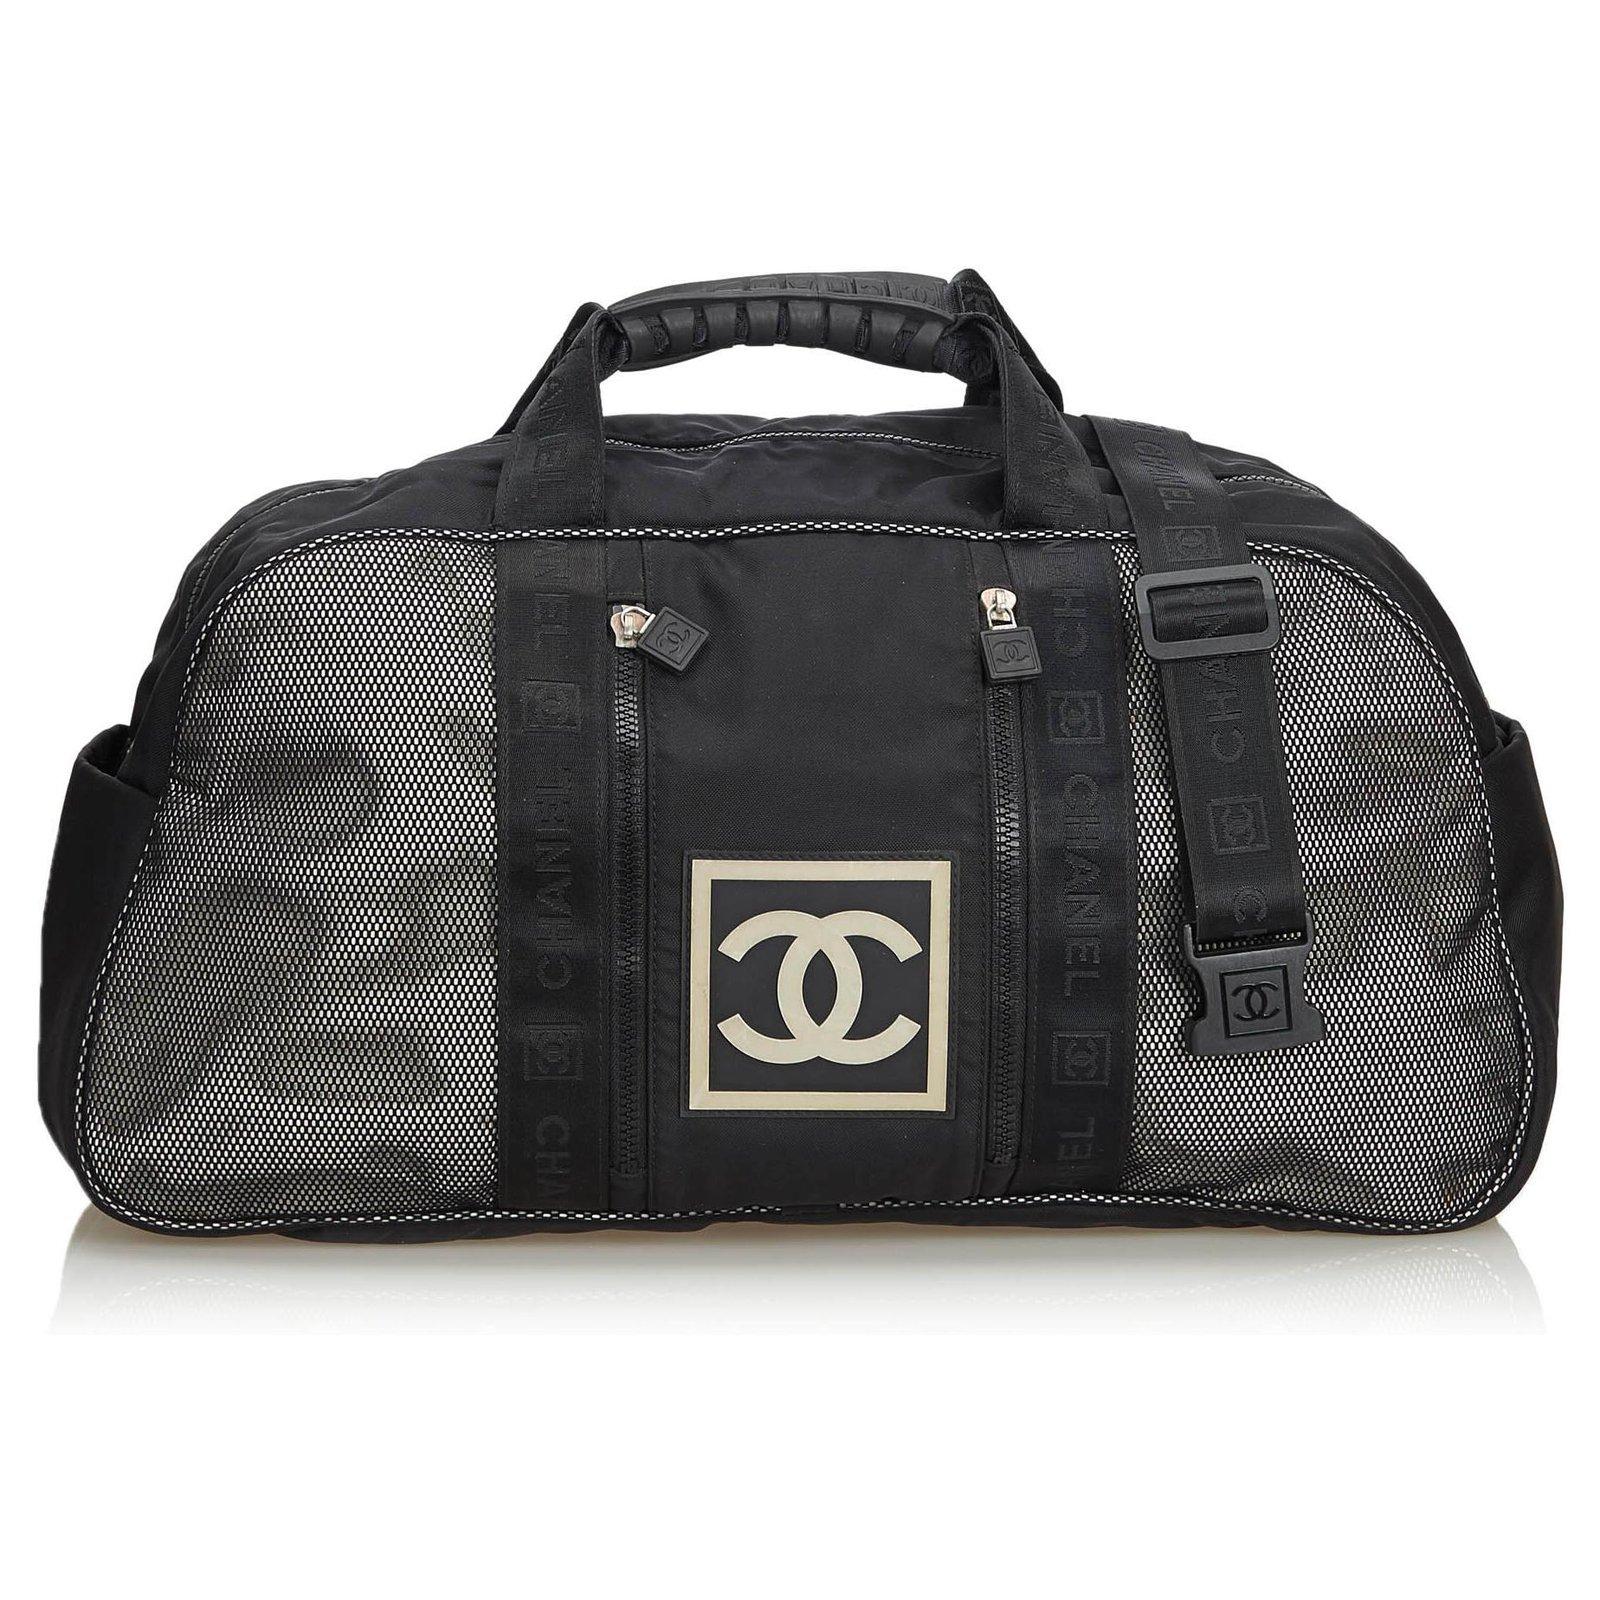 Chanel 2005 Vintage Black CC Nylon Sport Mesh Large Gym Travel Duffle Bag 

Rubber CC Logo at front
Nylon body with rubber trim
Front exterior zip pockets
Rolled handles
Detachable strap
Top zip closure
Interior zippered pocket

Made in Italy
